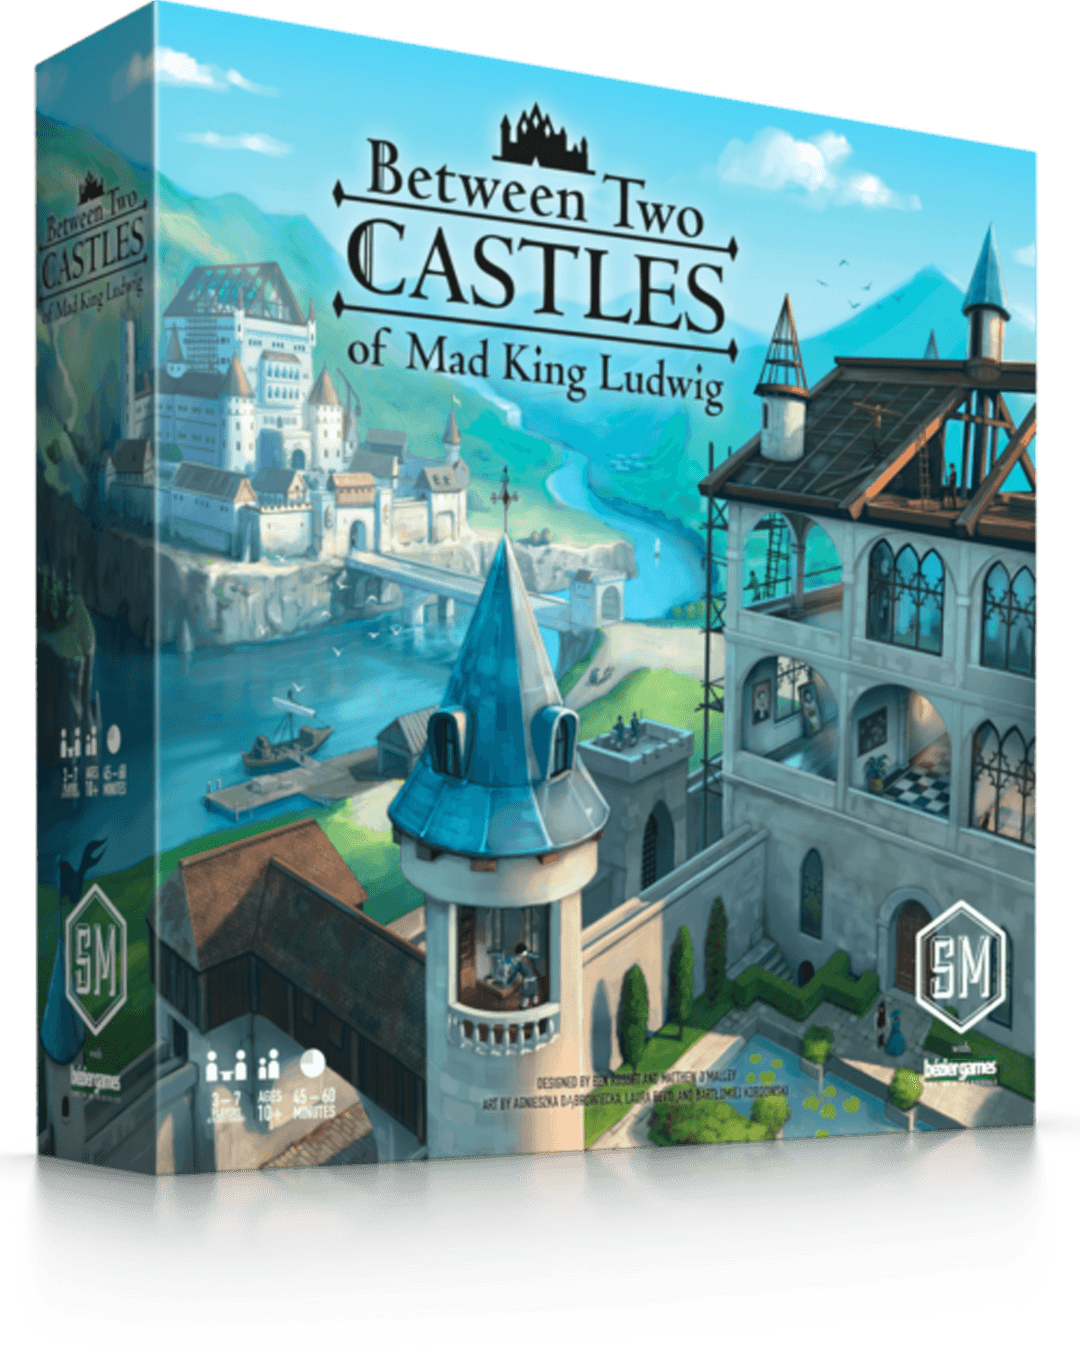 Between Two Castles of Mad King Ludwig - The Fourth Place